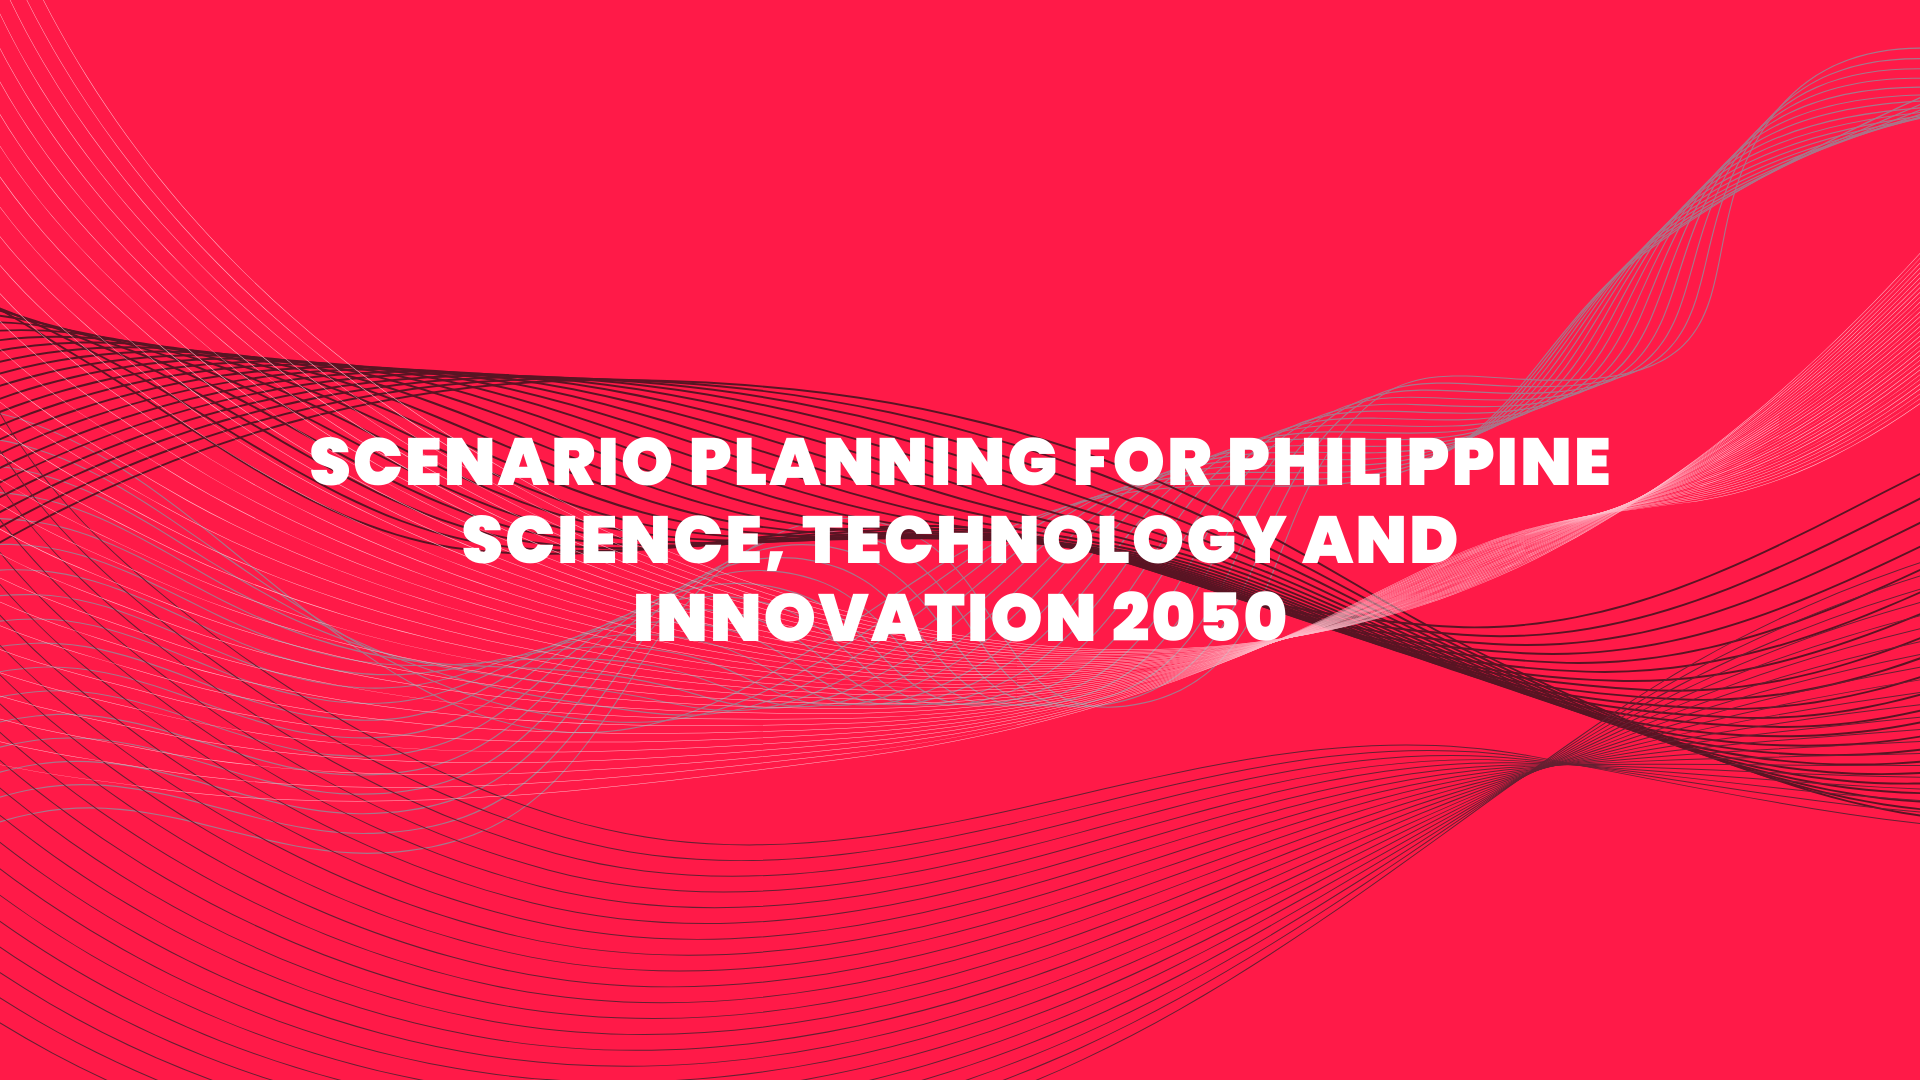 Scenario Planning for Philippine Science, Technology and Innovation 2050